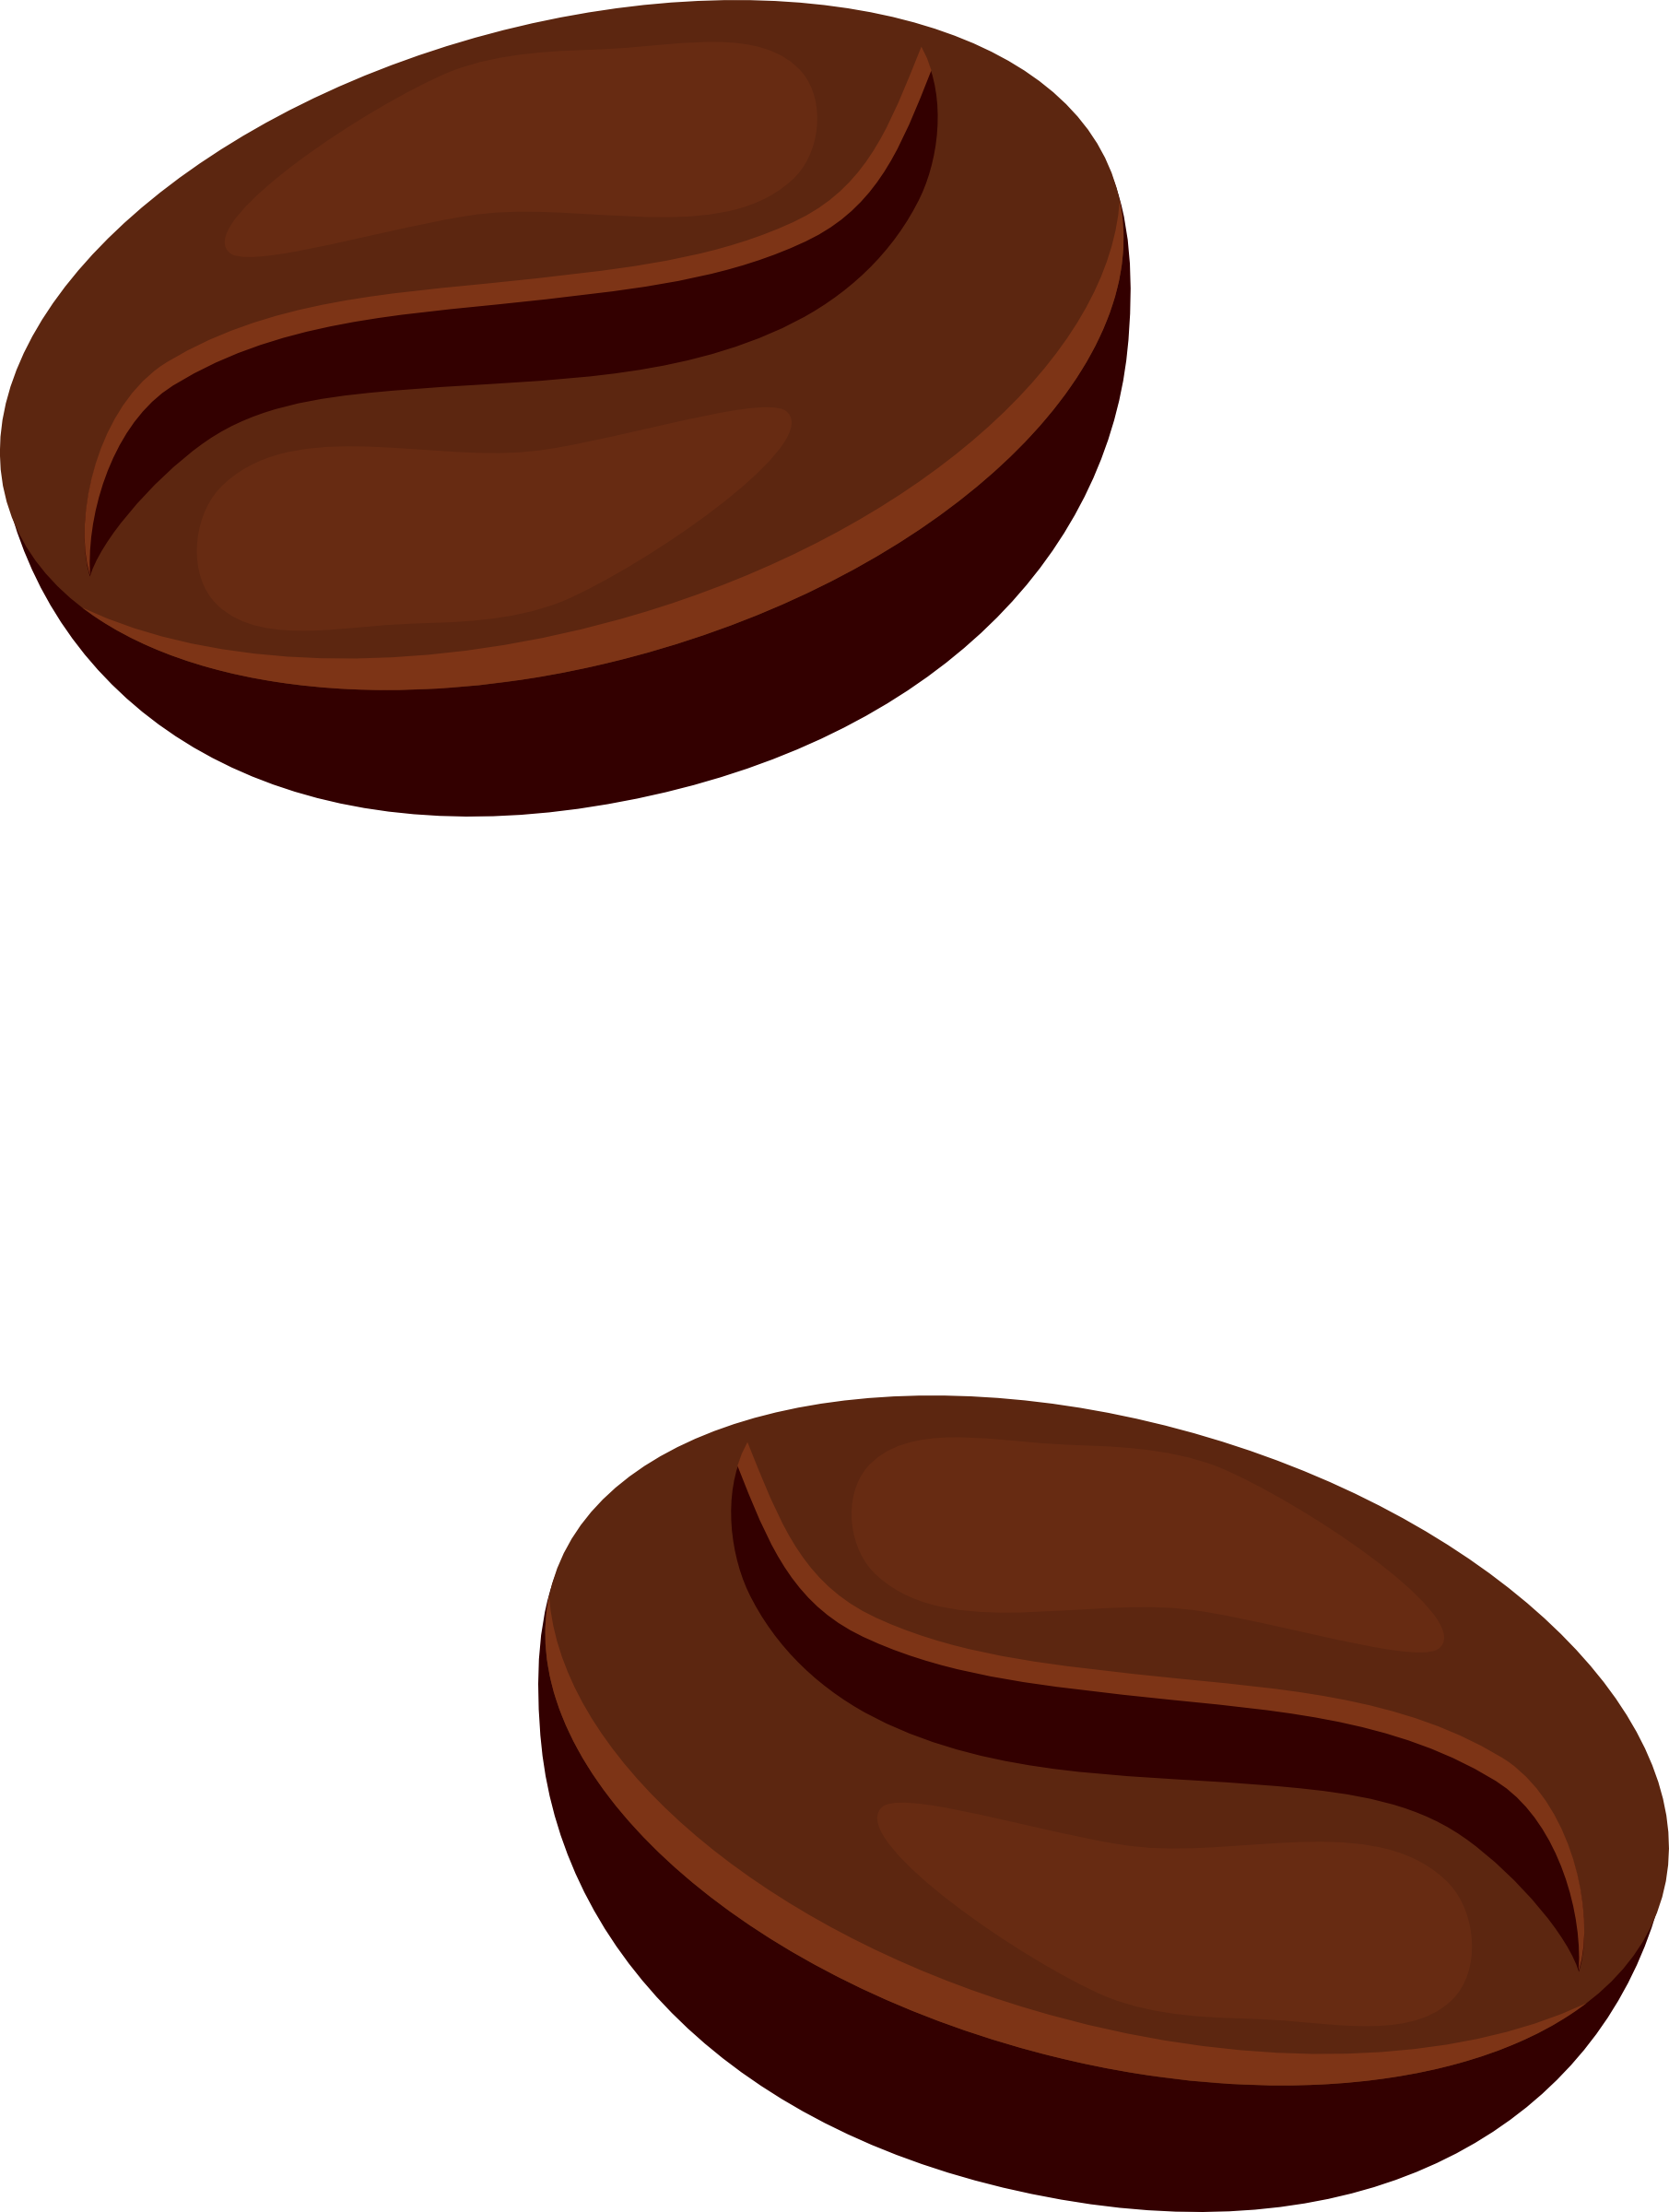 Coffee beans outline clipart vector